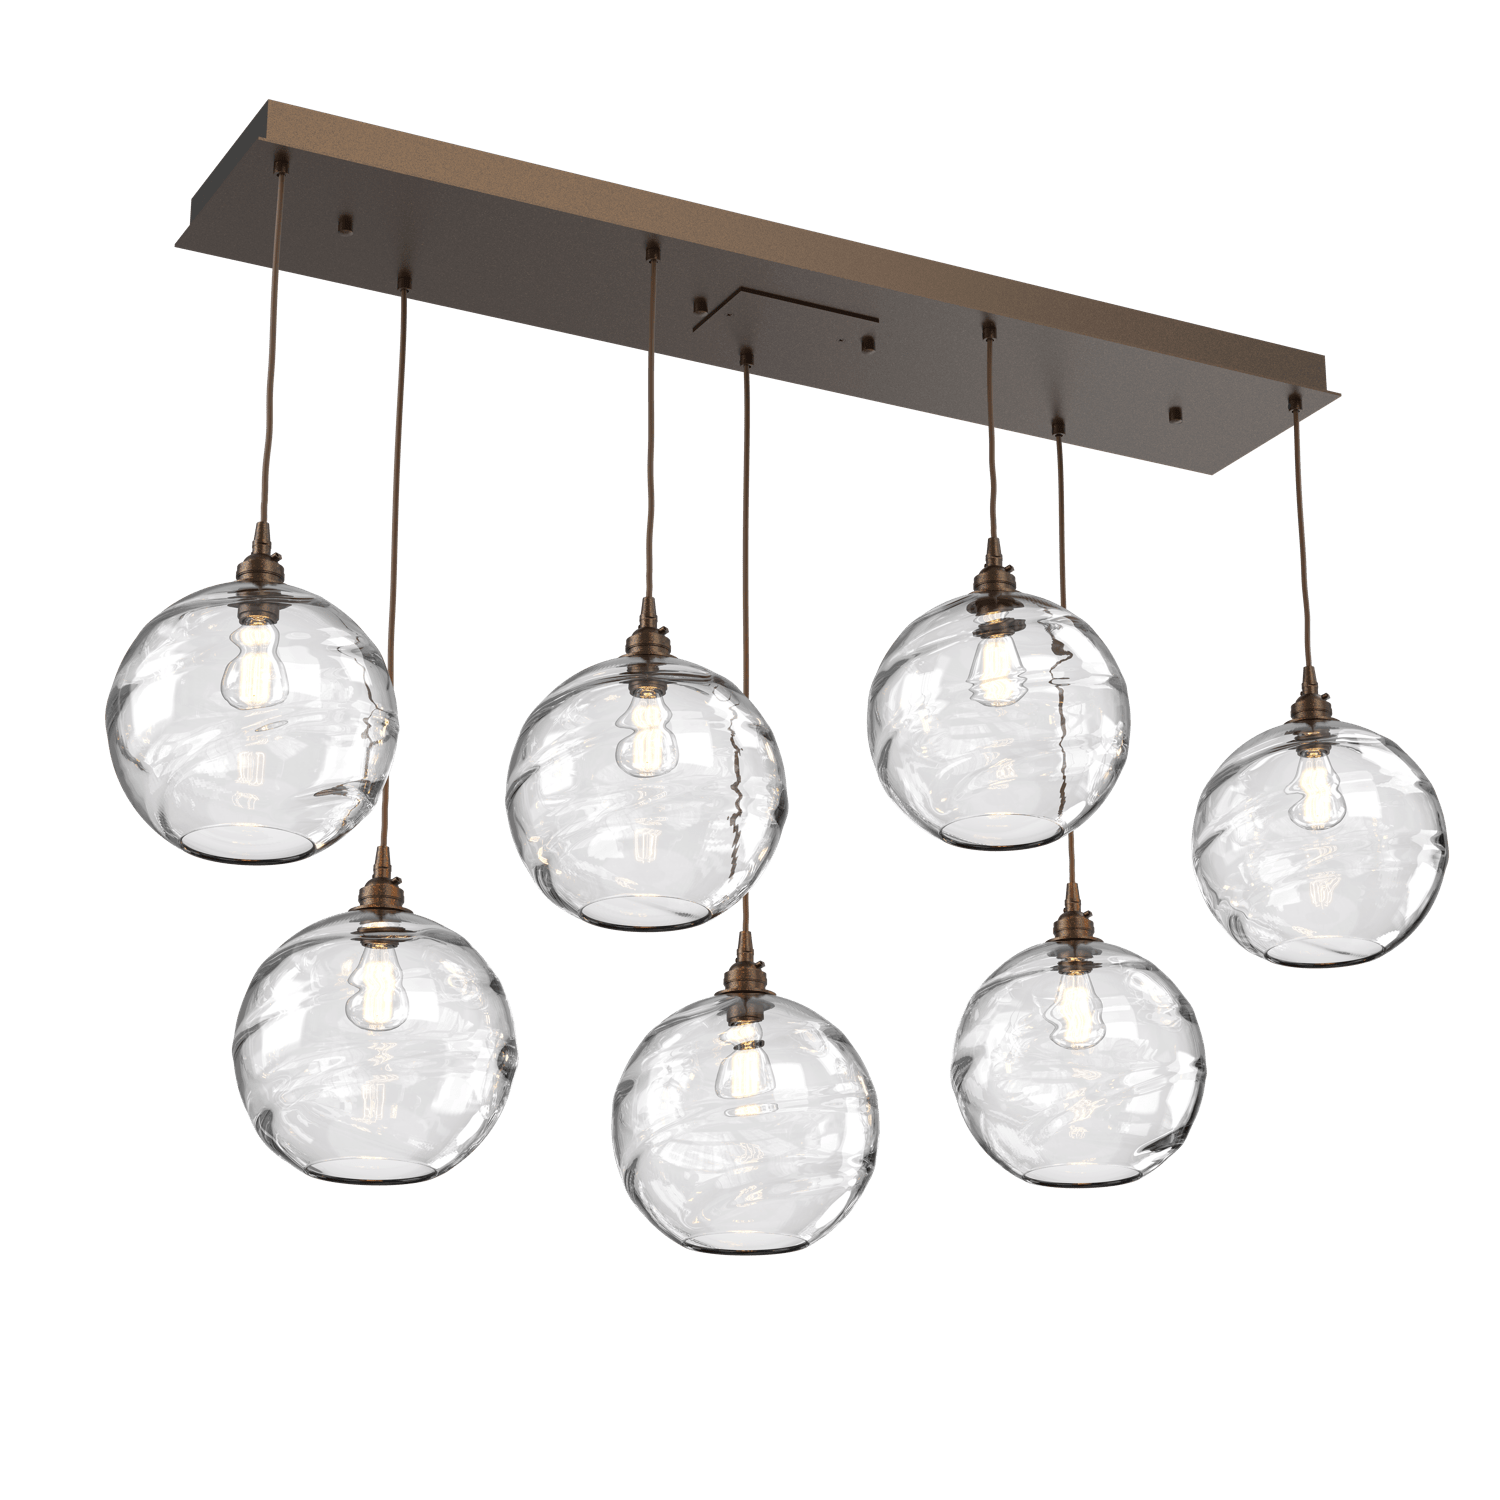 PLB0047-07-FB-OC-Hammerton-Studio-Optic-Blown-Glass-Terra-7-light-linear-pendant-chandelier-with-flat-bronze-finish-and-optic-clear-blown-glass-shades-and-incandescent-lamping